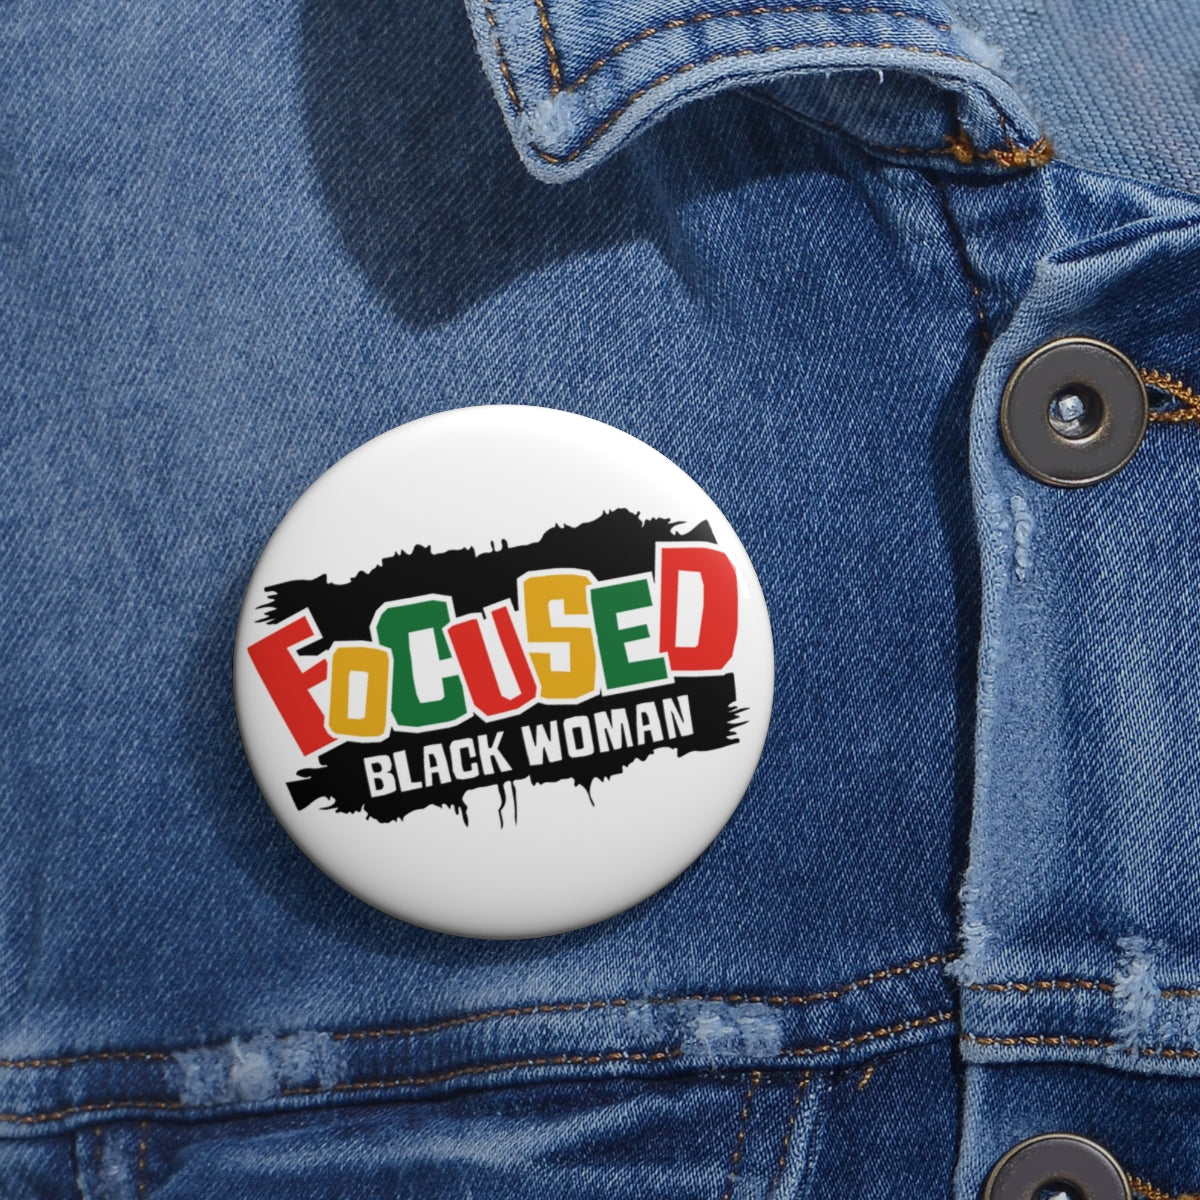 Focused Black Woman Pin Buttons